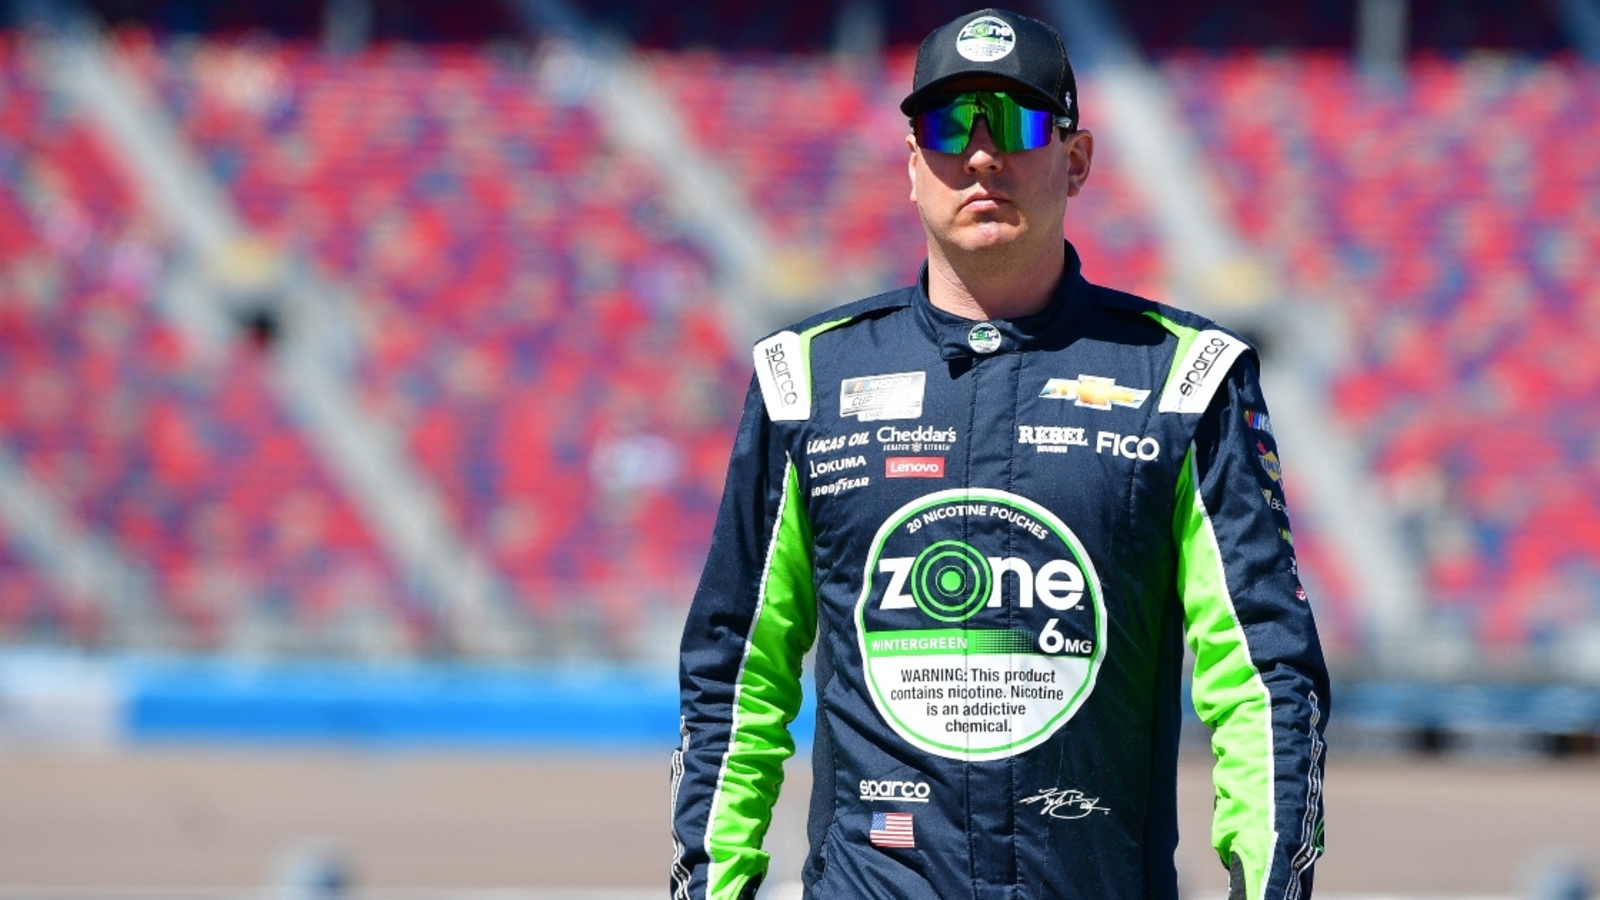 Kyle Busch on Dale Earnhardt Jr.’s ‘old guards’ comments: ‘Jimmie ruined it for a lot of us’